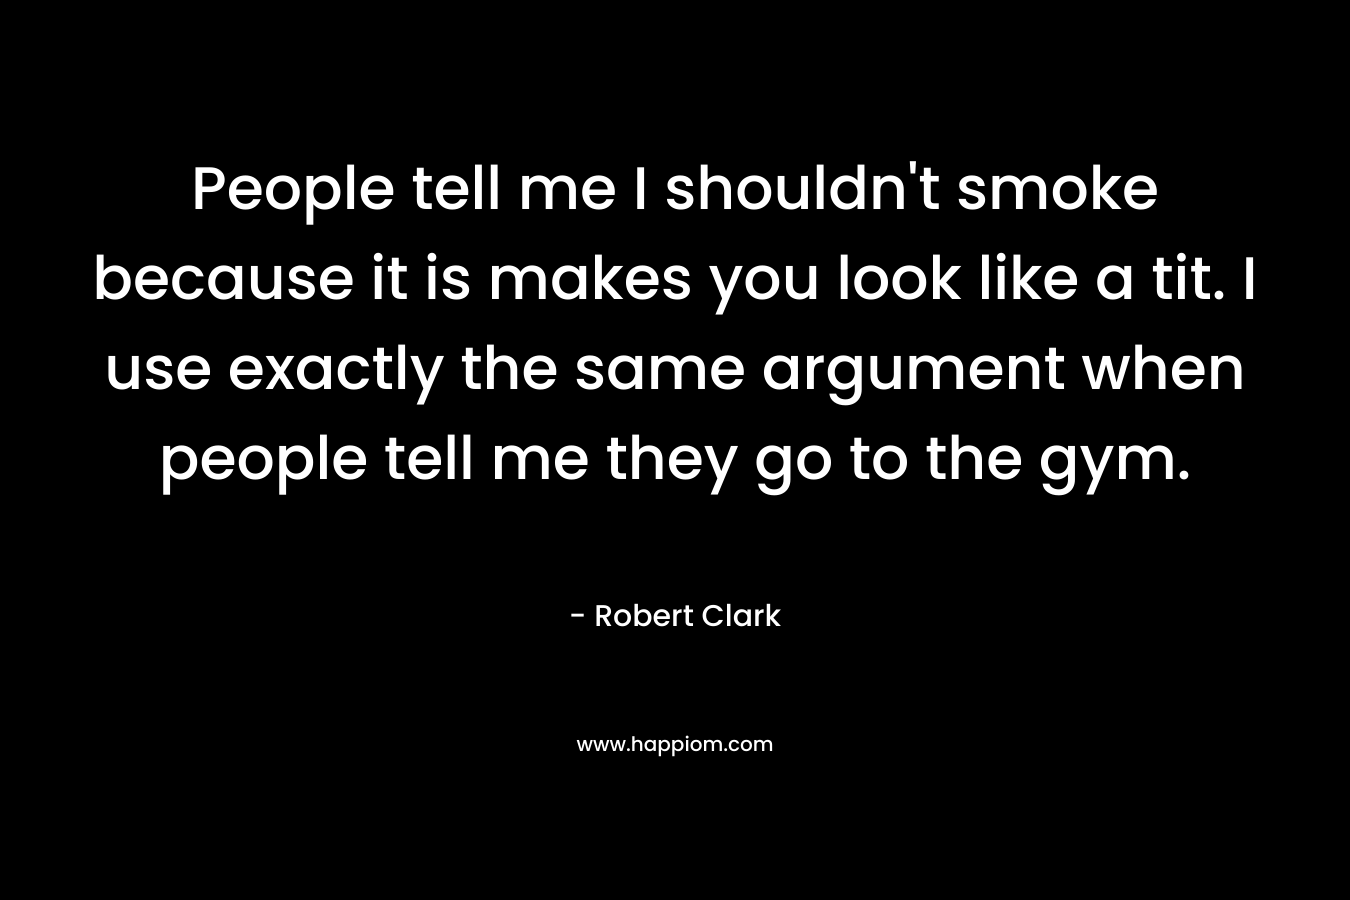 People tell me I shouldn't smoke because it is makes you look like a tit. I use exactly the same argument when people tell me they go to the gym.